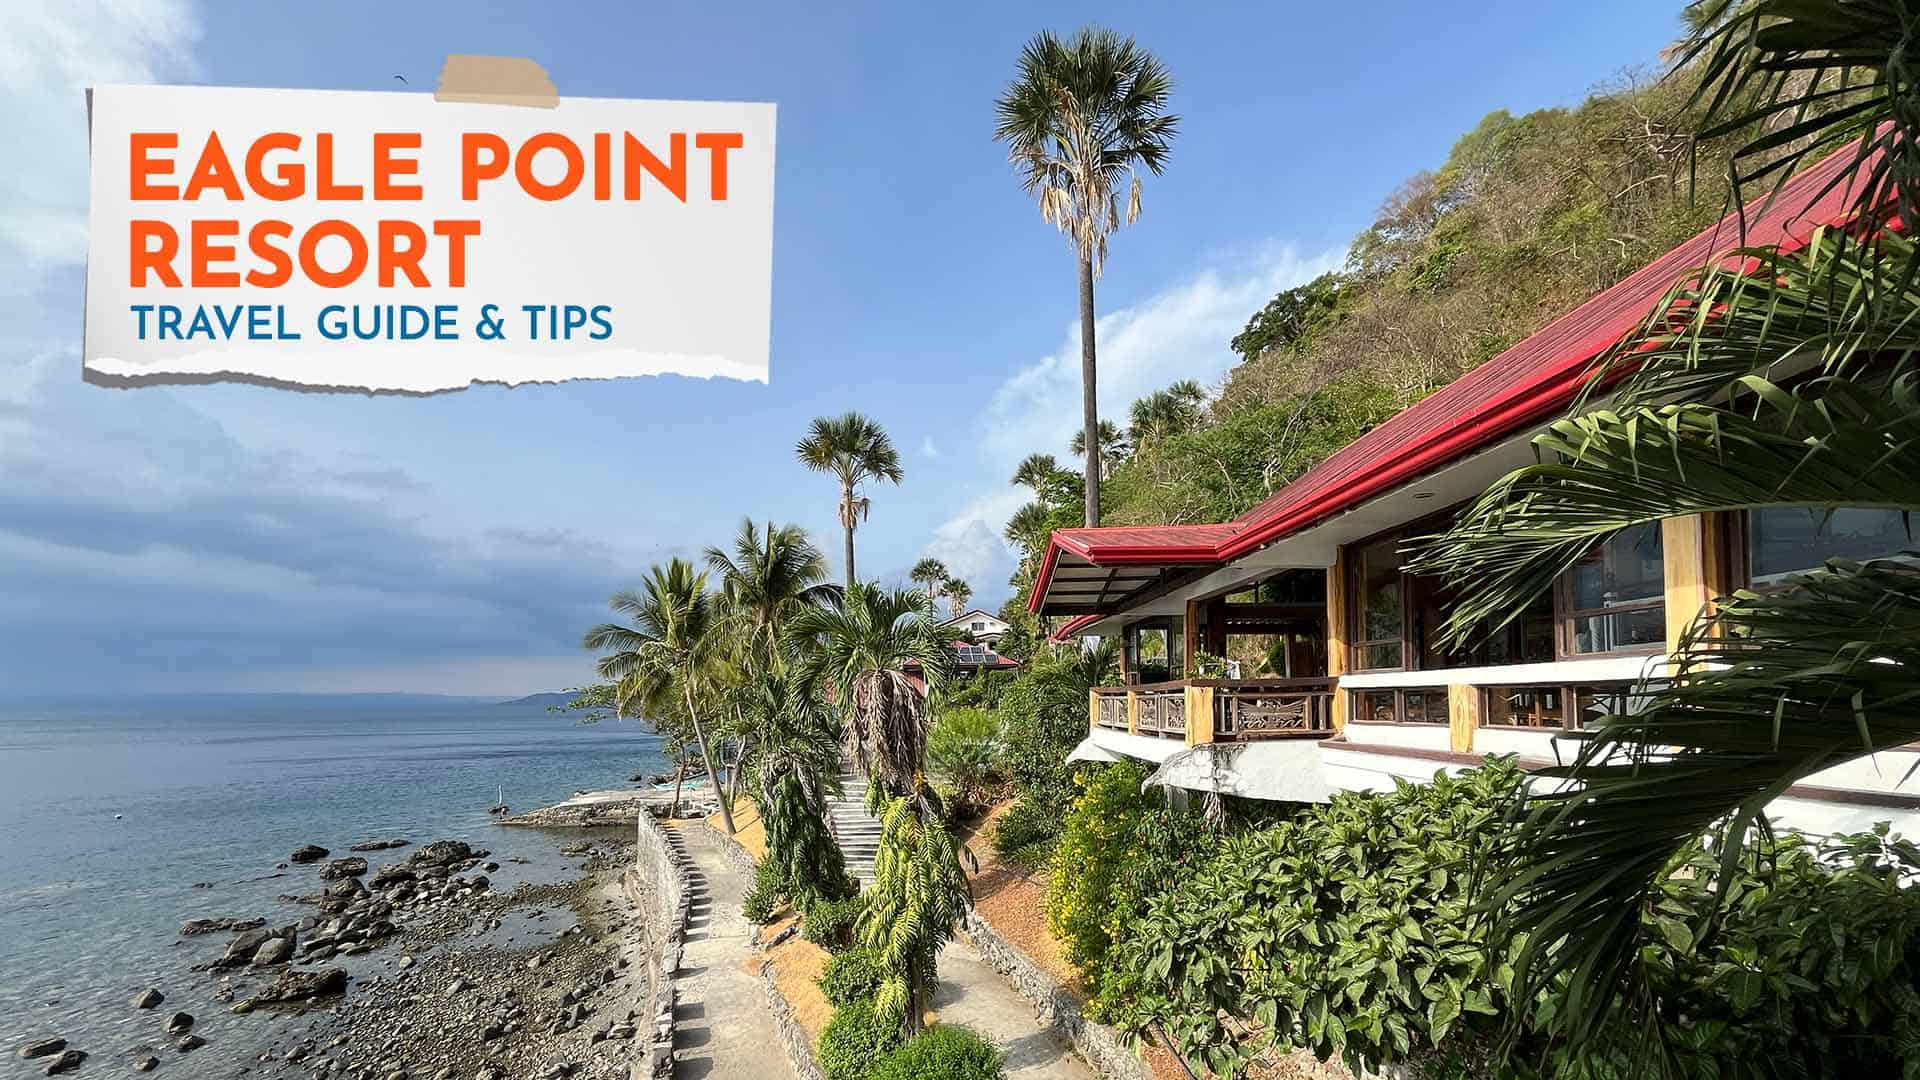 Eagle Point Resort Travel Guide & Tips